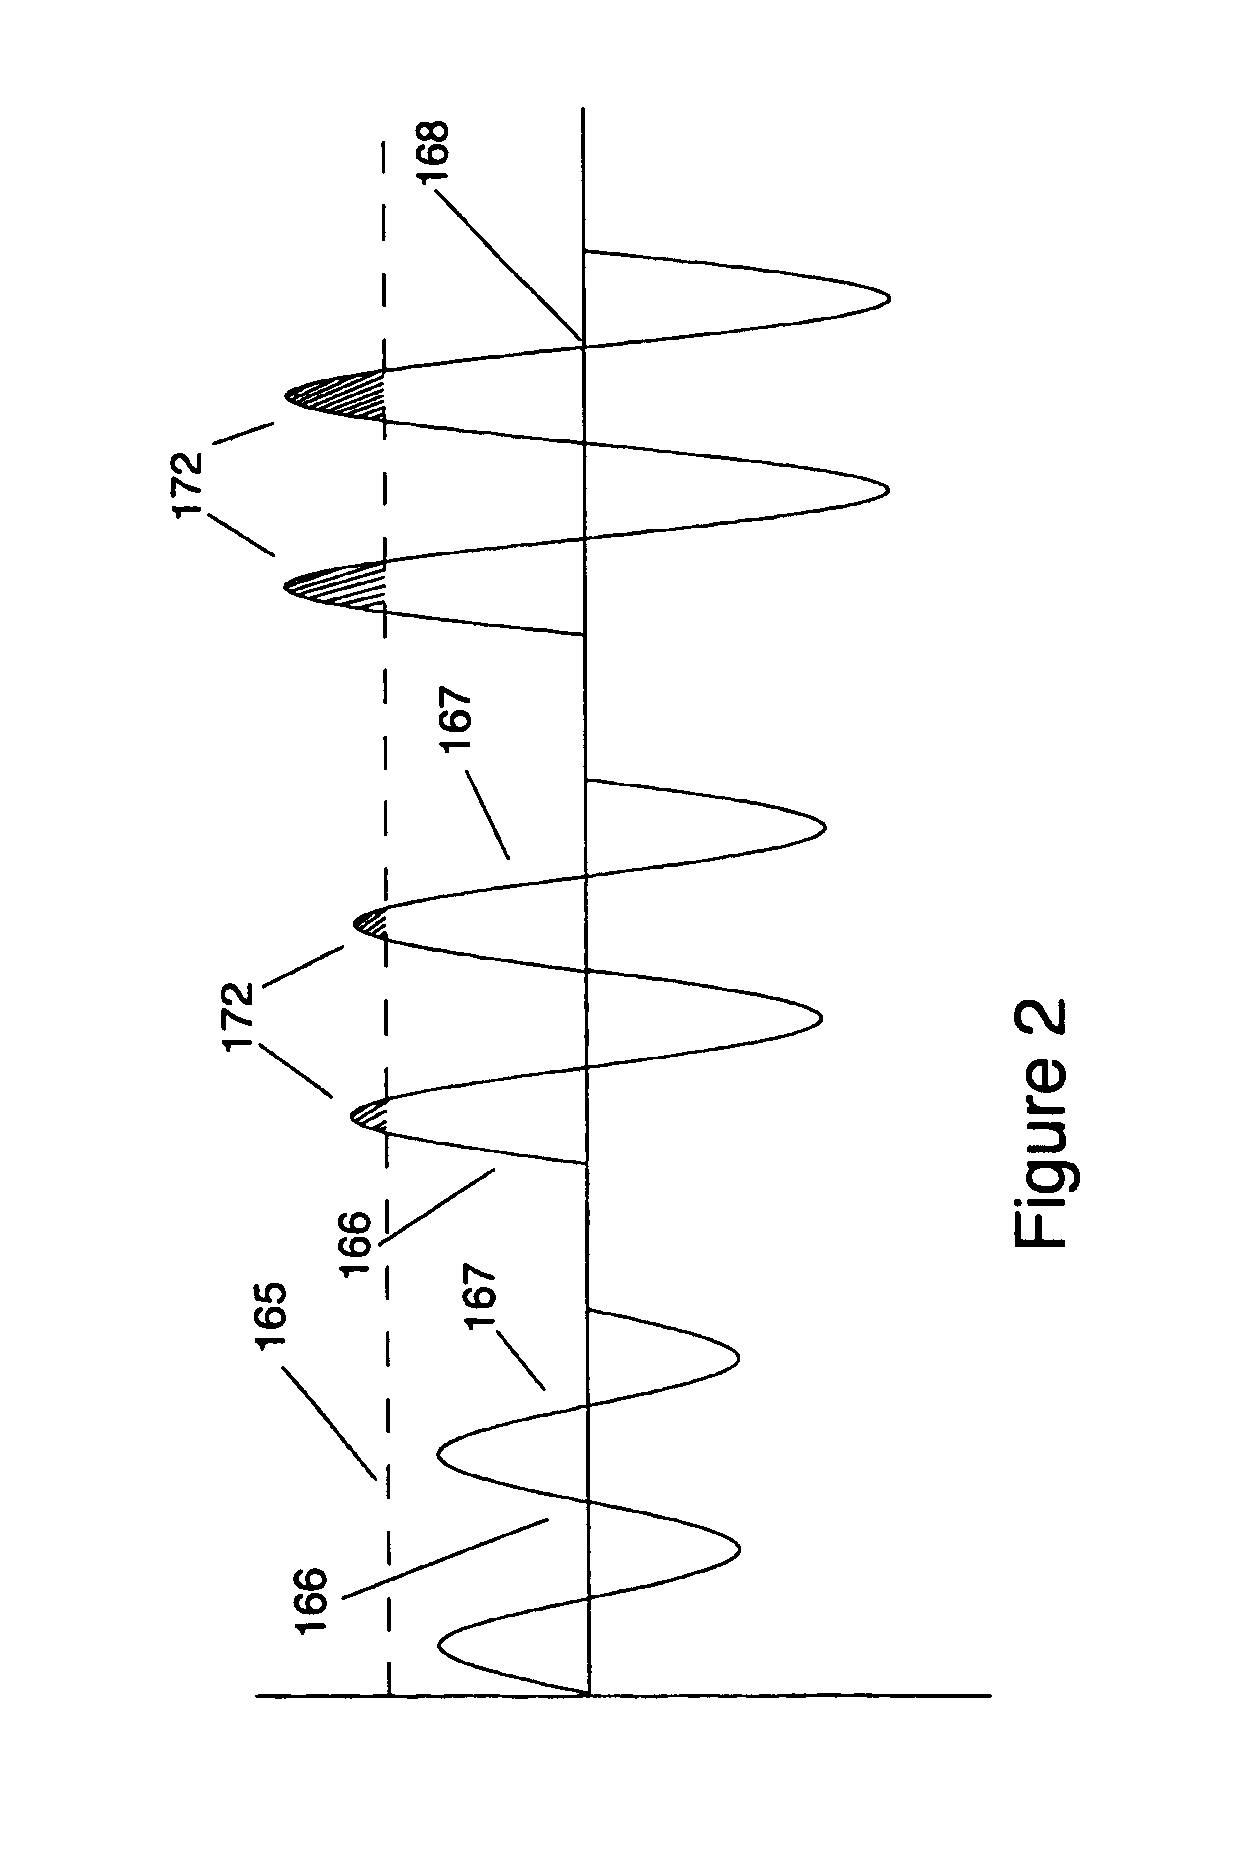 Apparatus for hot fusion of fusion-reactive gases